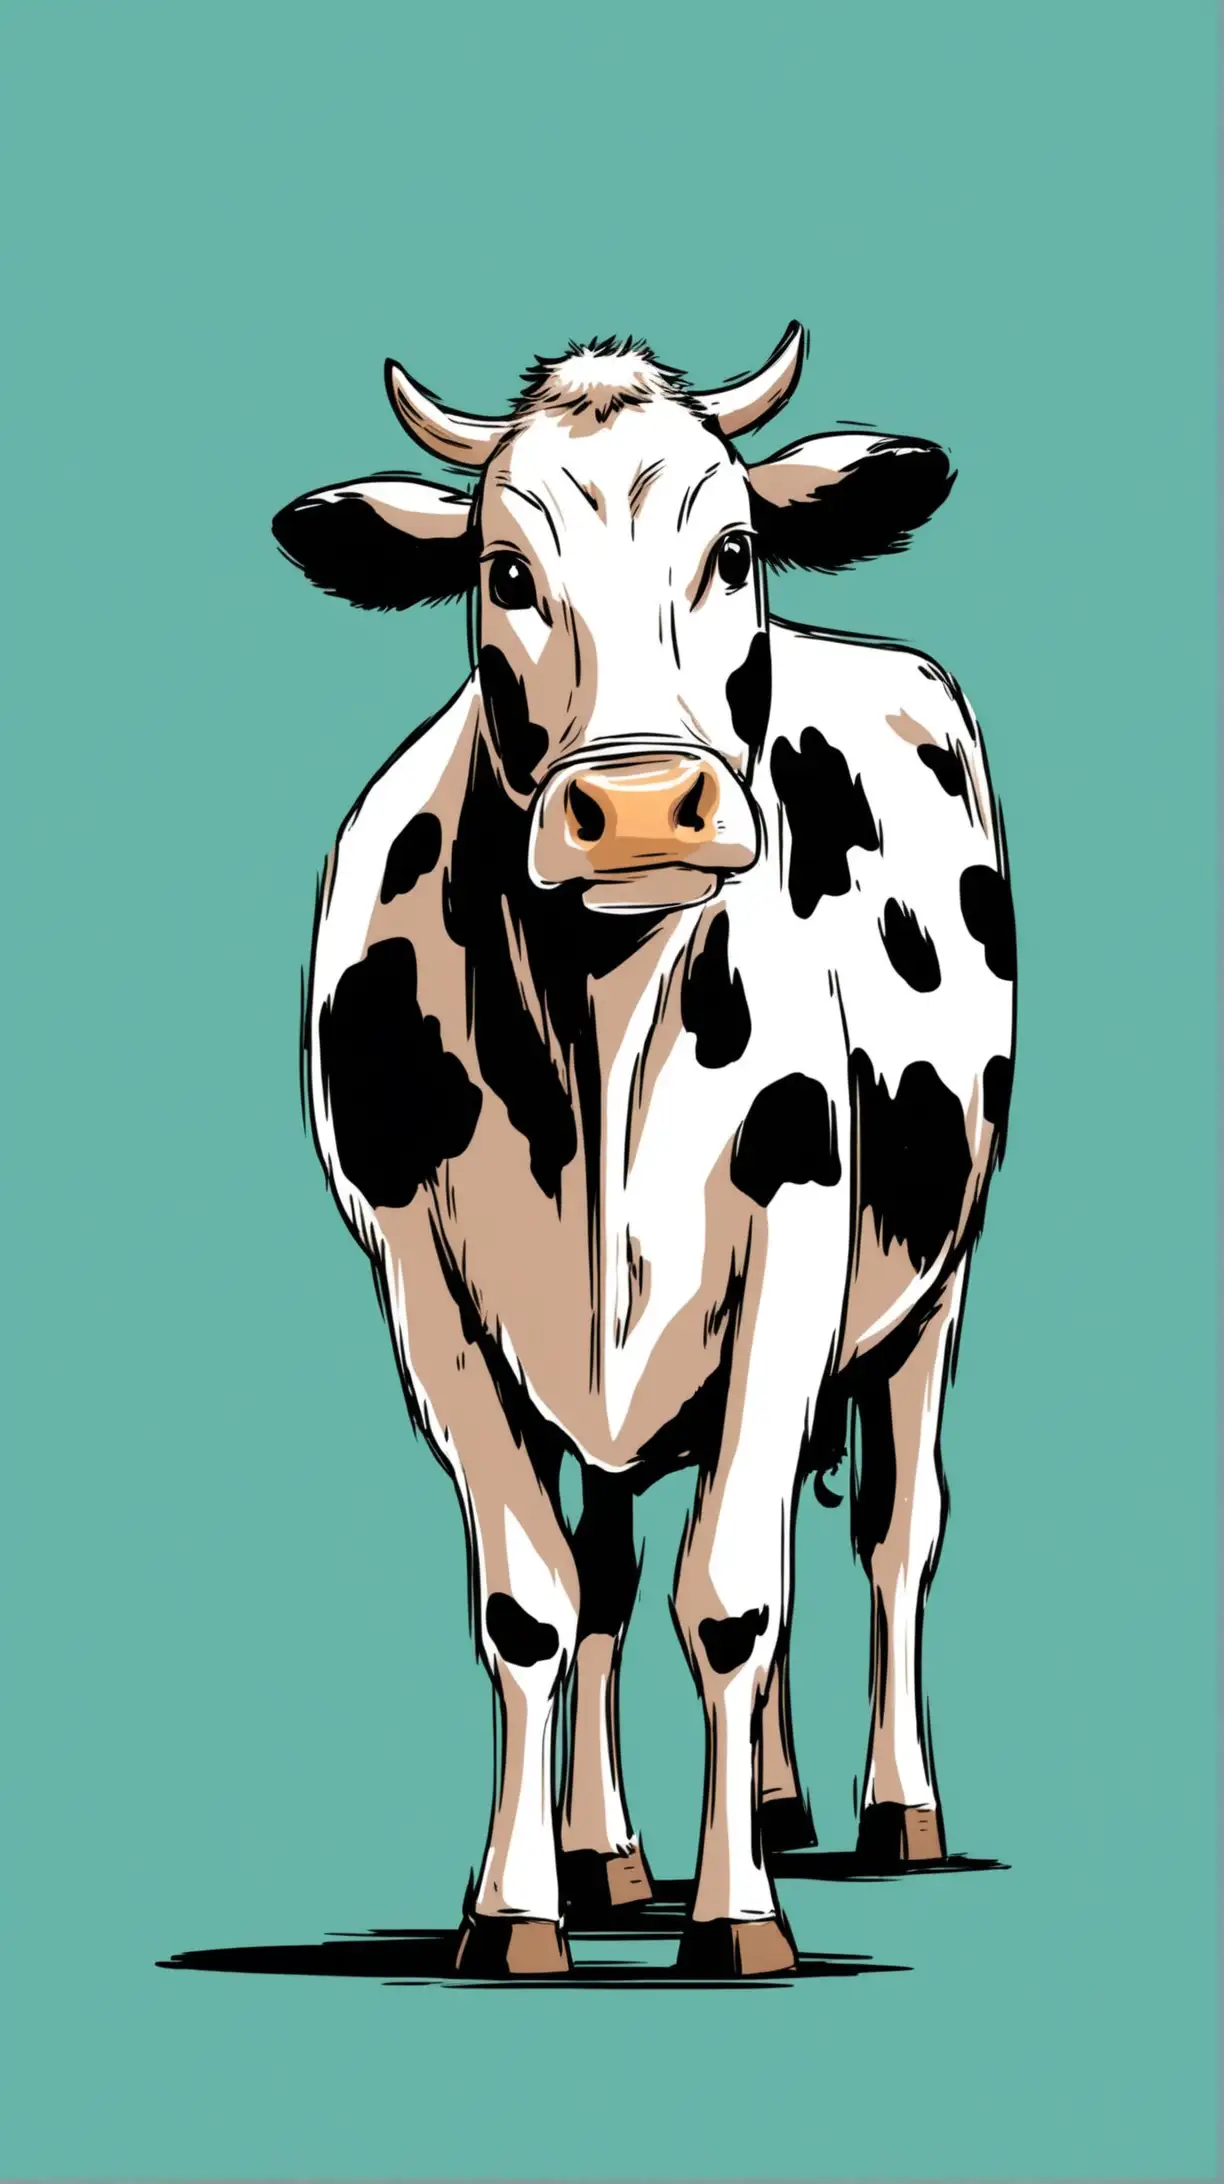 Comic book style.  Medium shot of a cow from the front.  Simple background.